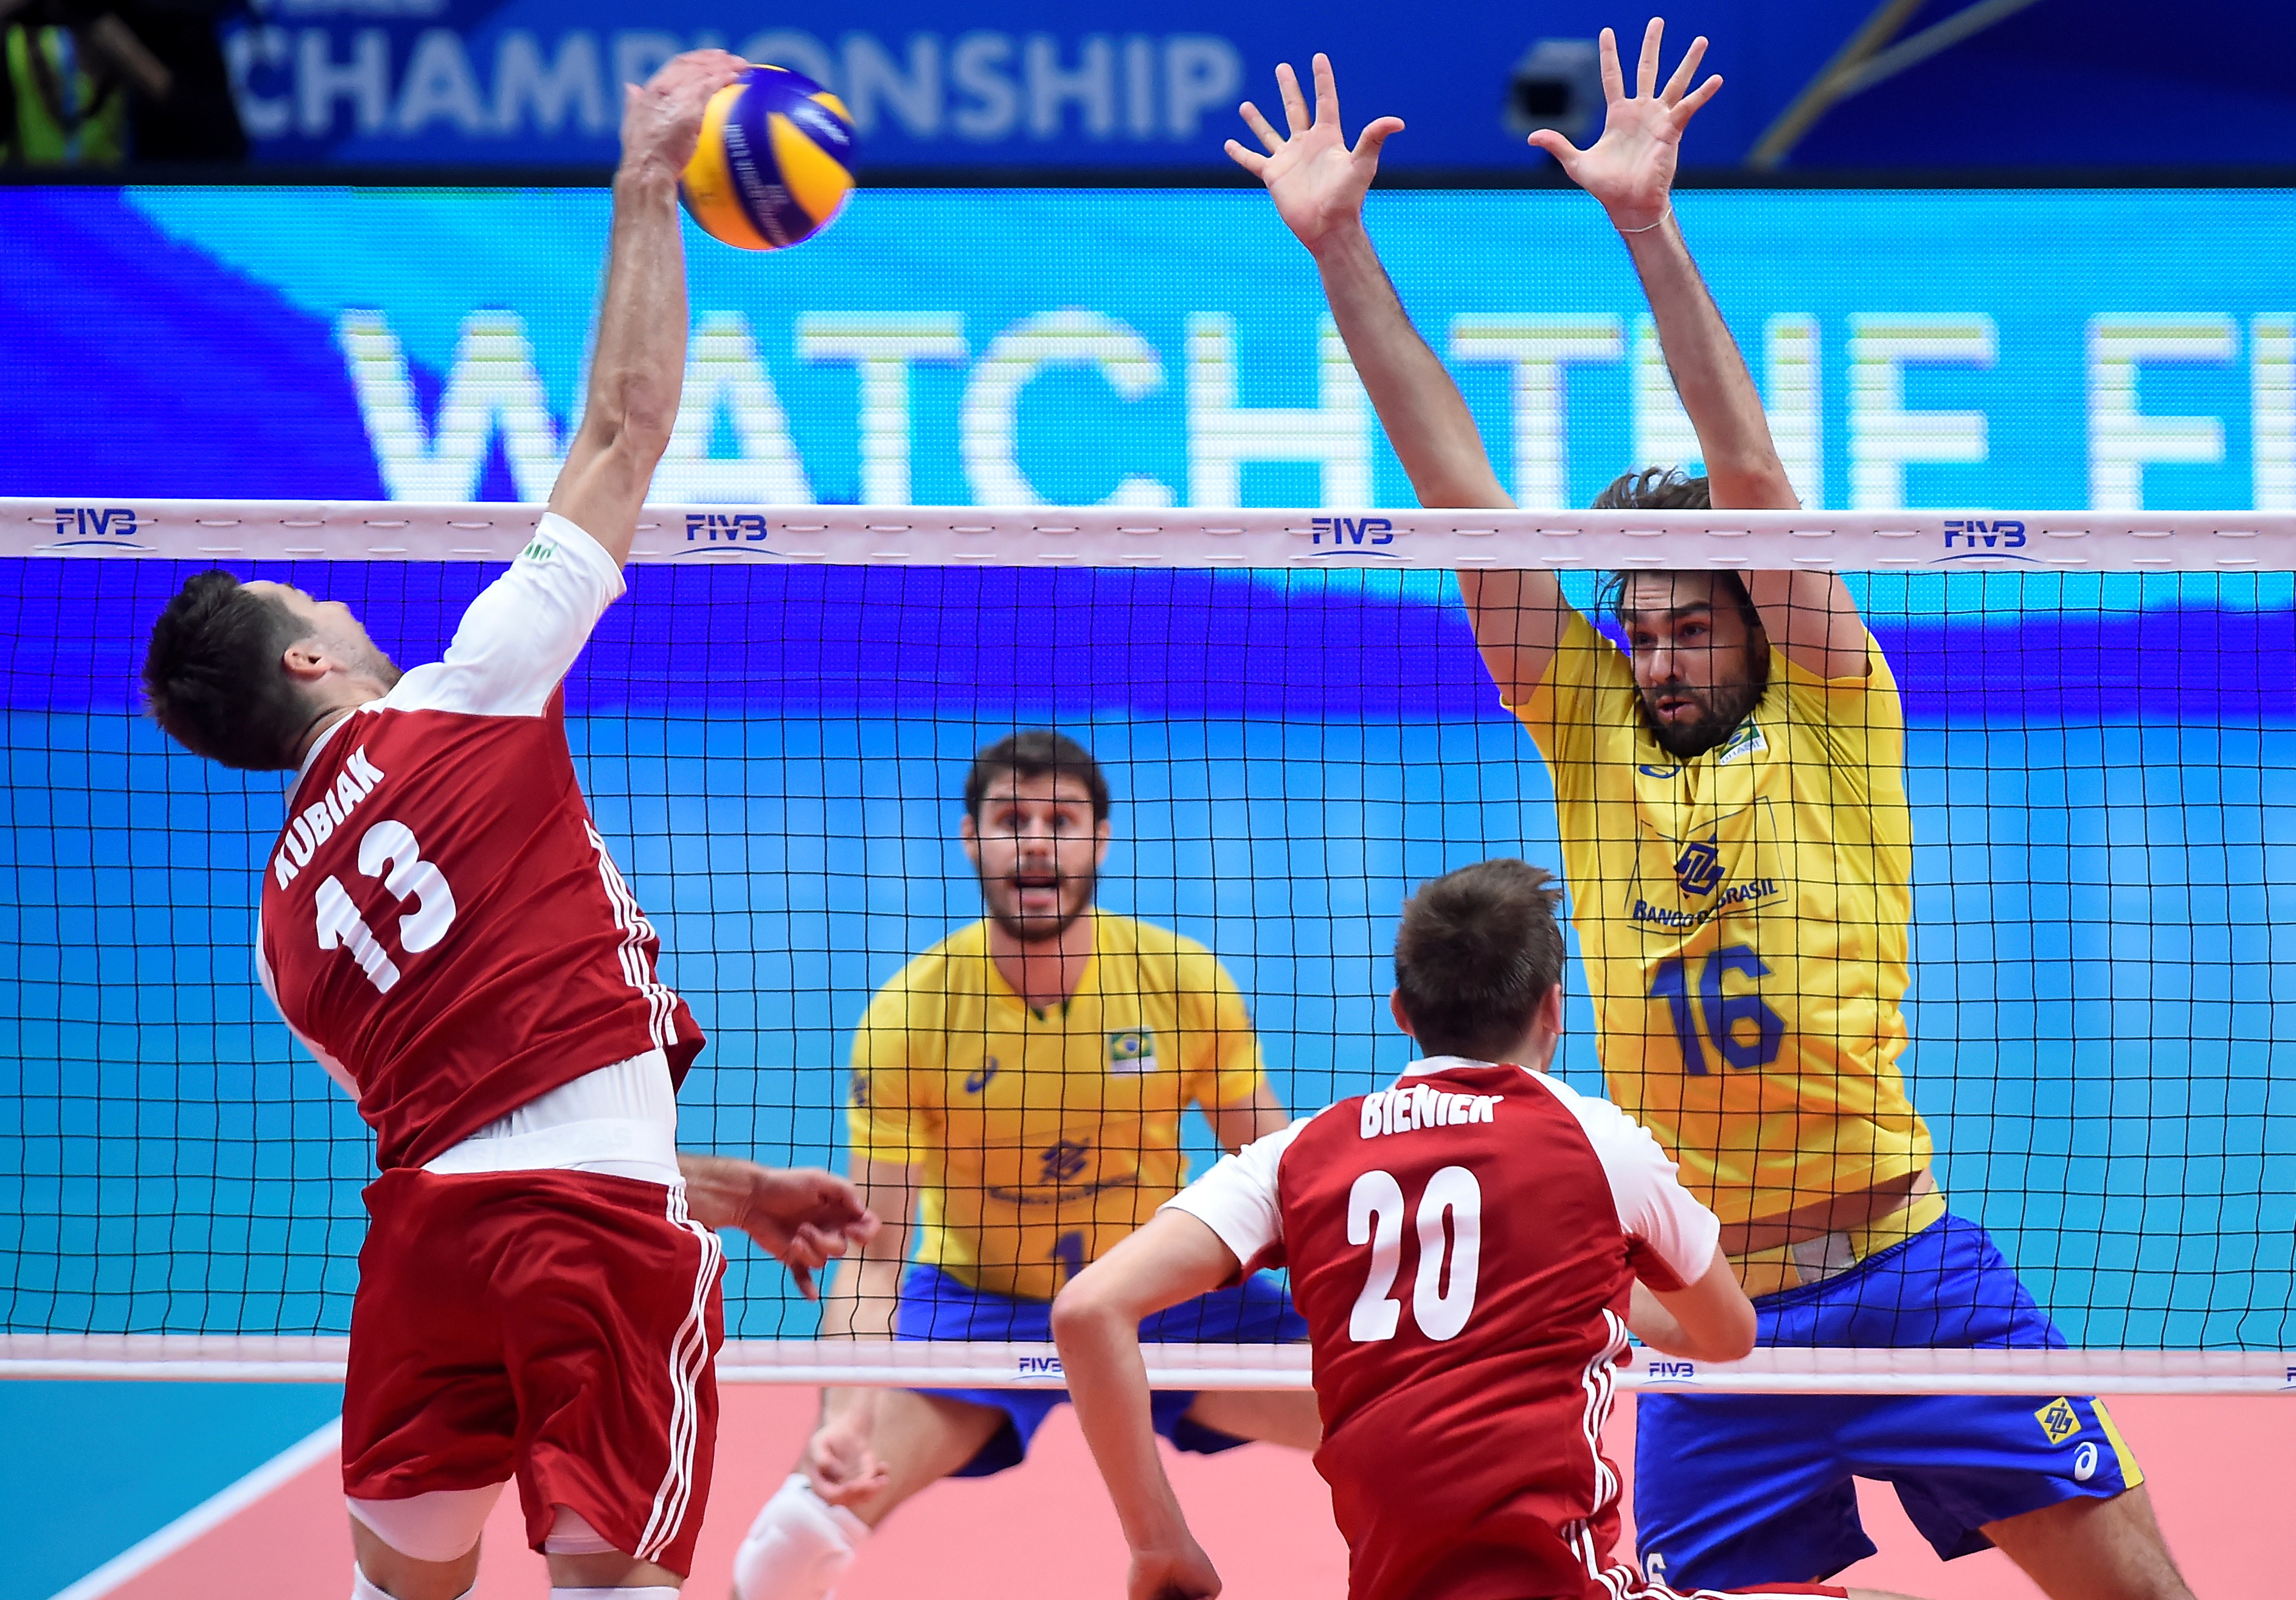 FIVB Volleyball Men's World Championship Italy and Bulgaria 2018